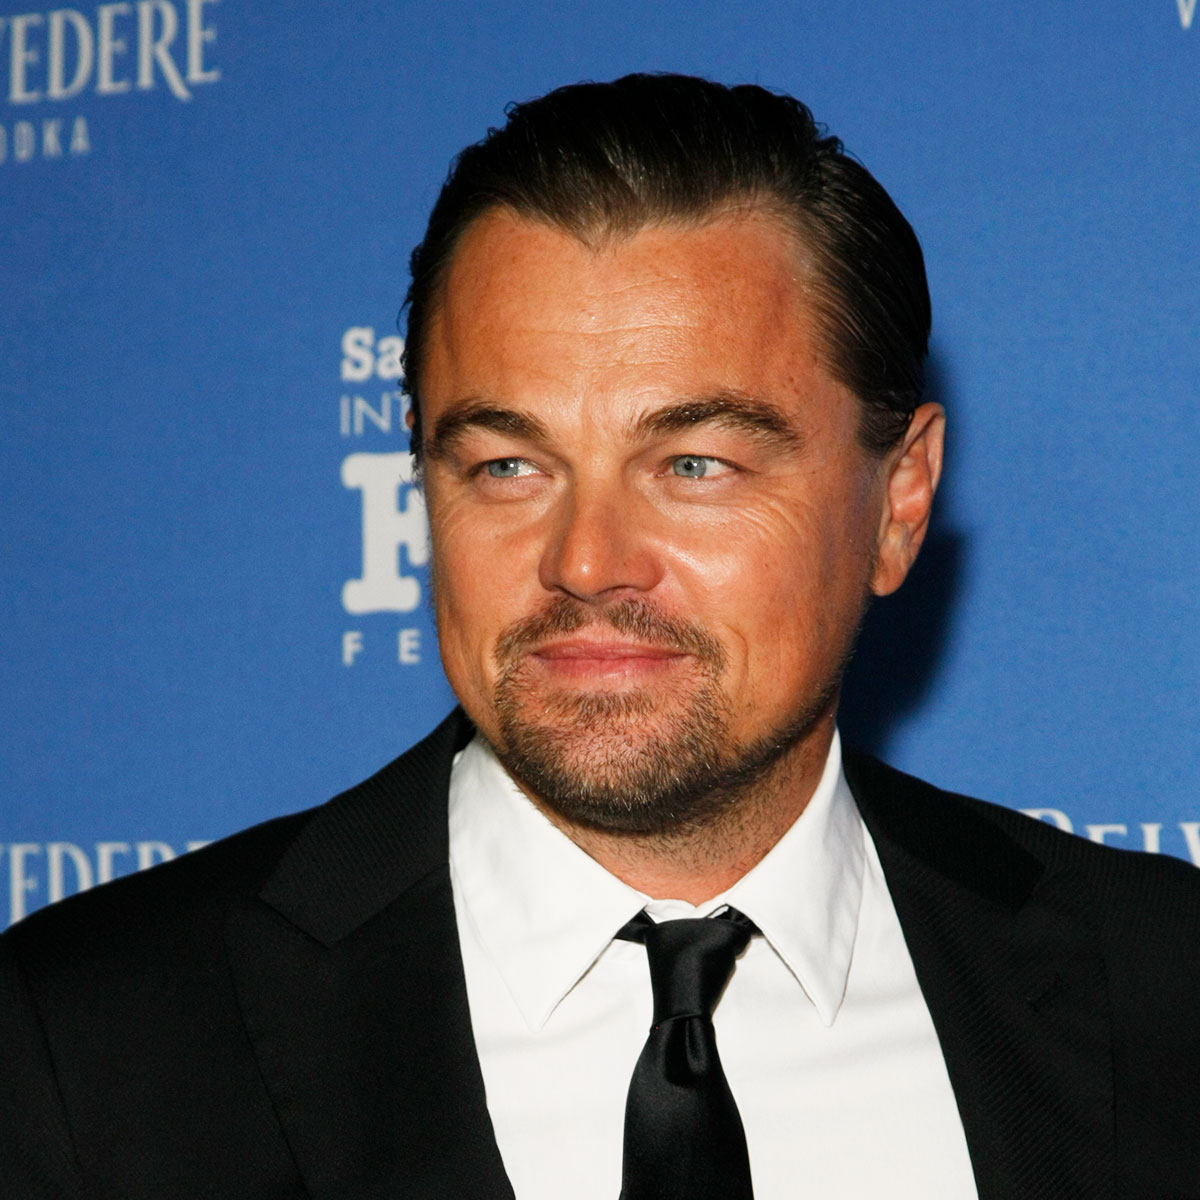 Twitter Is Slamming Leonardo DiCaprio For His New Relationship With A  19-Year-Old: 'She's Younger Than Titanic!' - SHEfinds